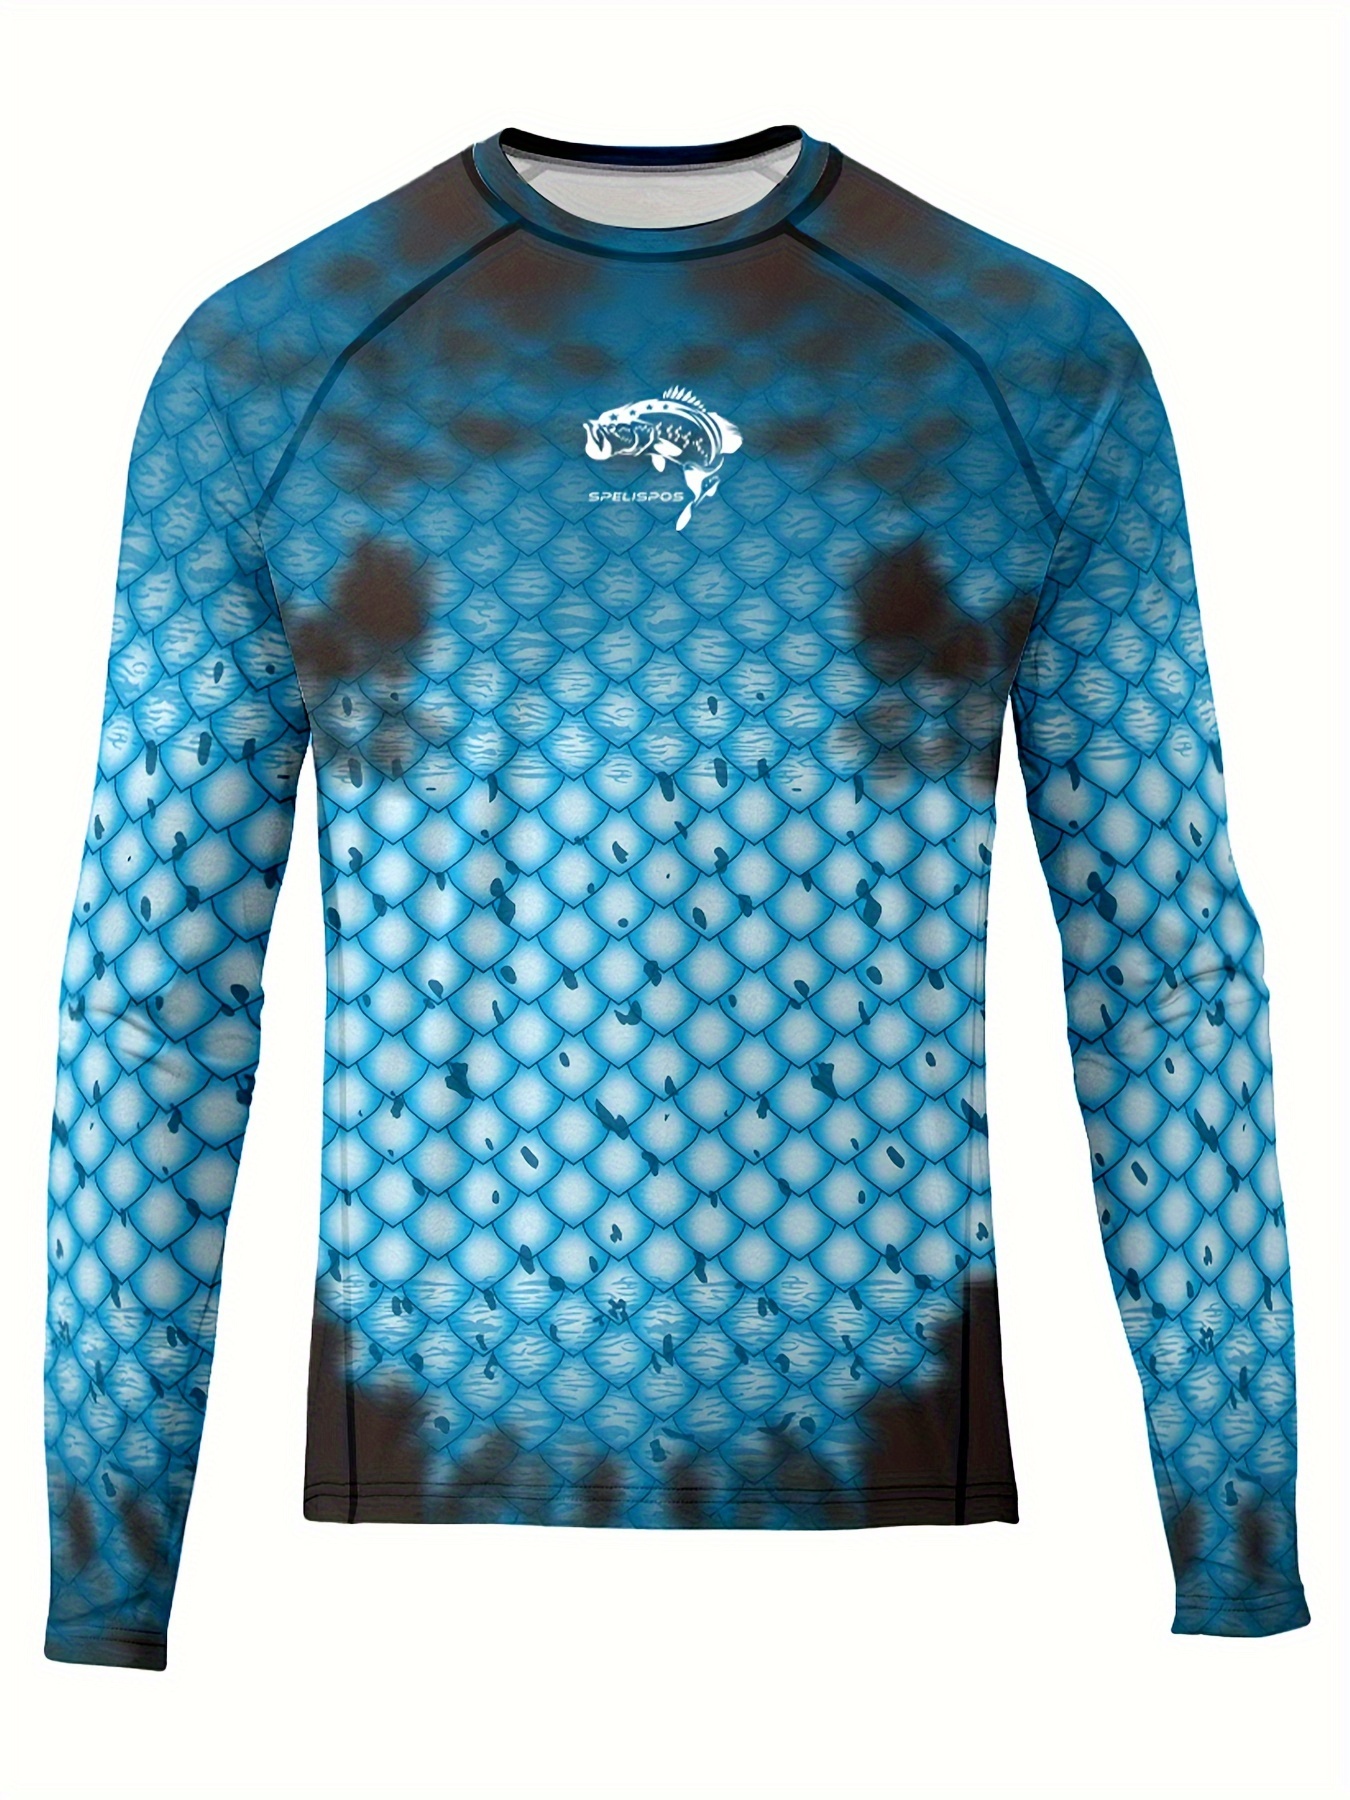 Fish Scale Digital Print Men's Long Sleeve Stretch Sunscreen Rash Guard, Lightweight and Breathable Men's Round Neck Sports Shirt, Outdoor Fishing